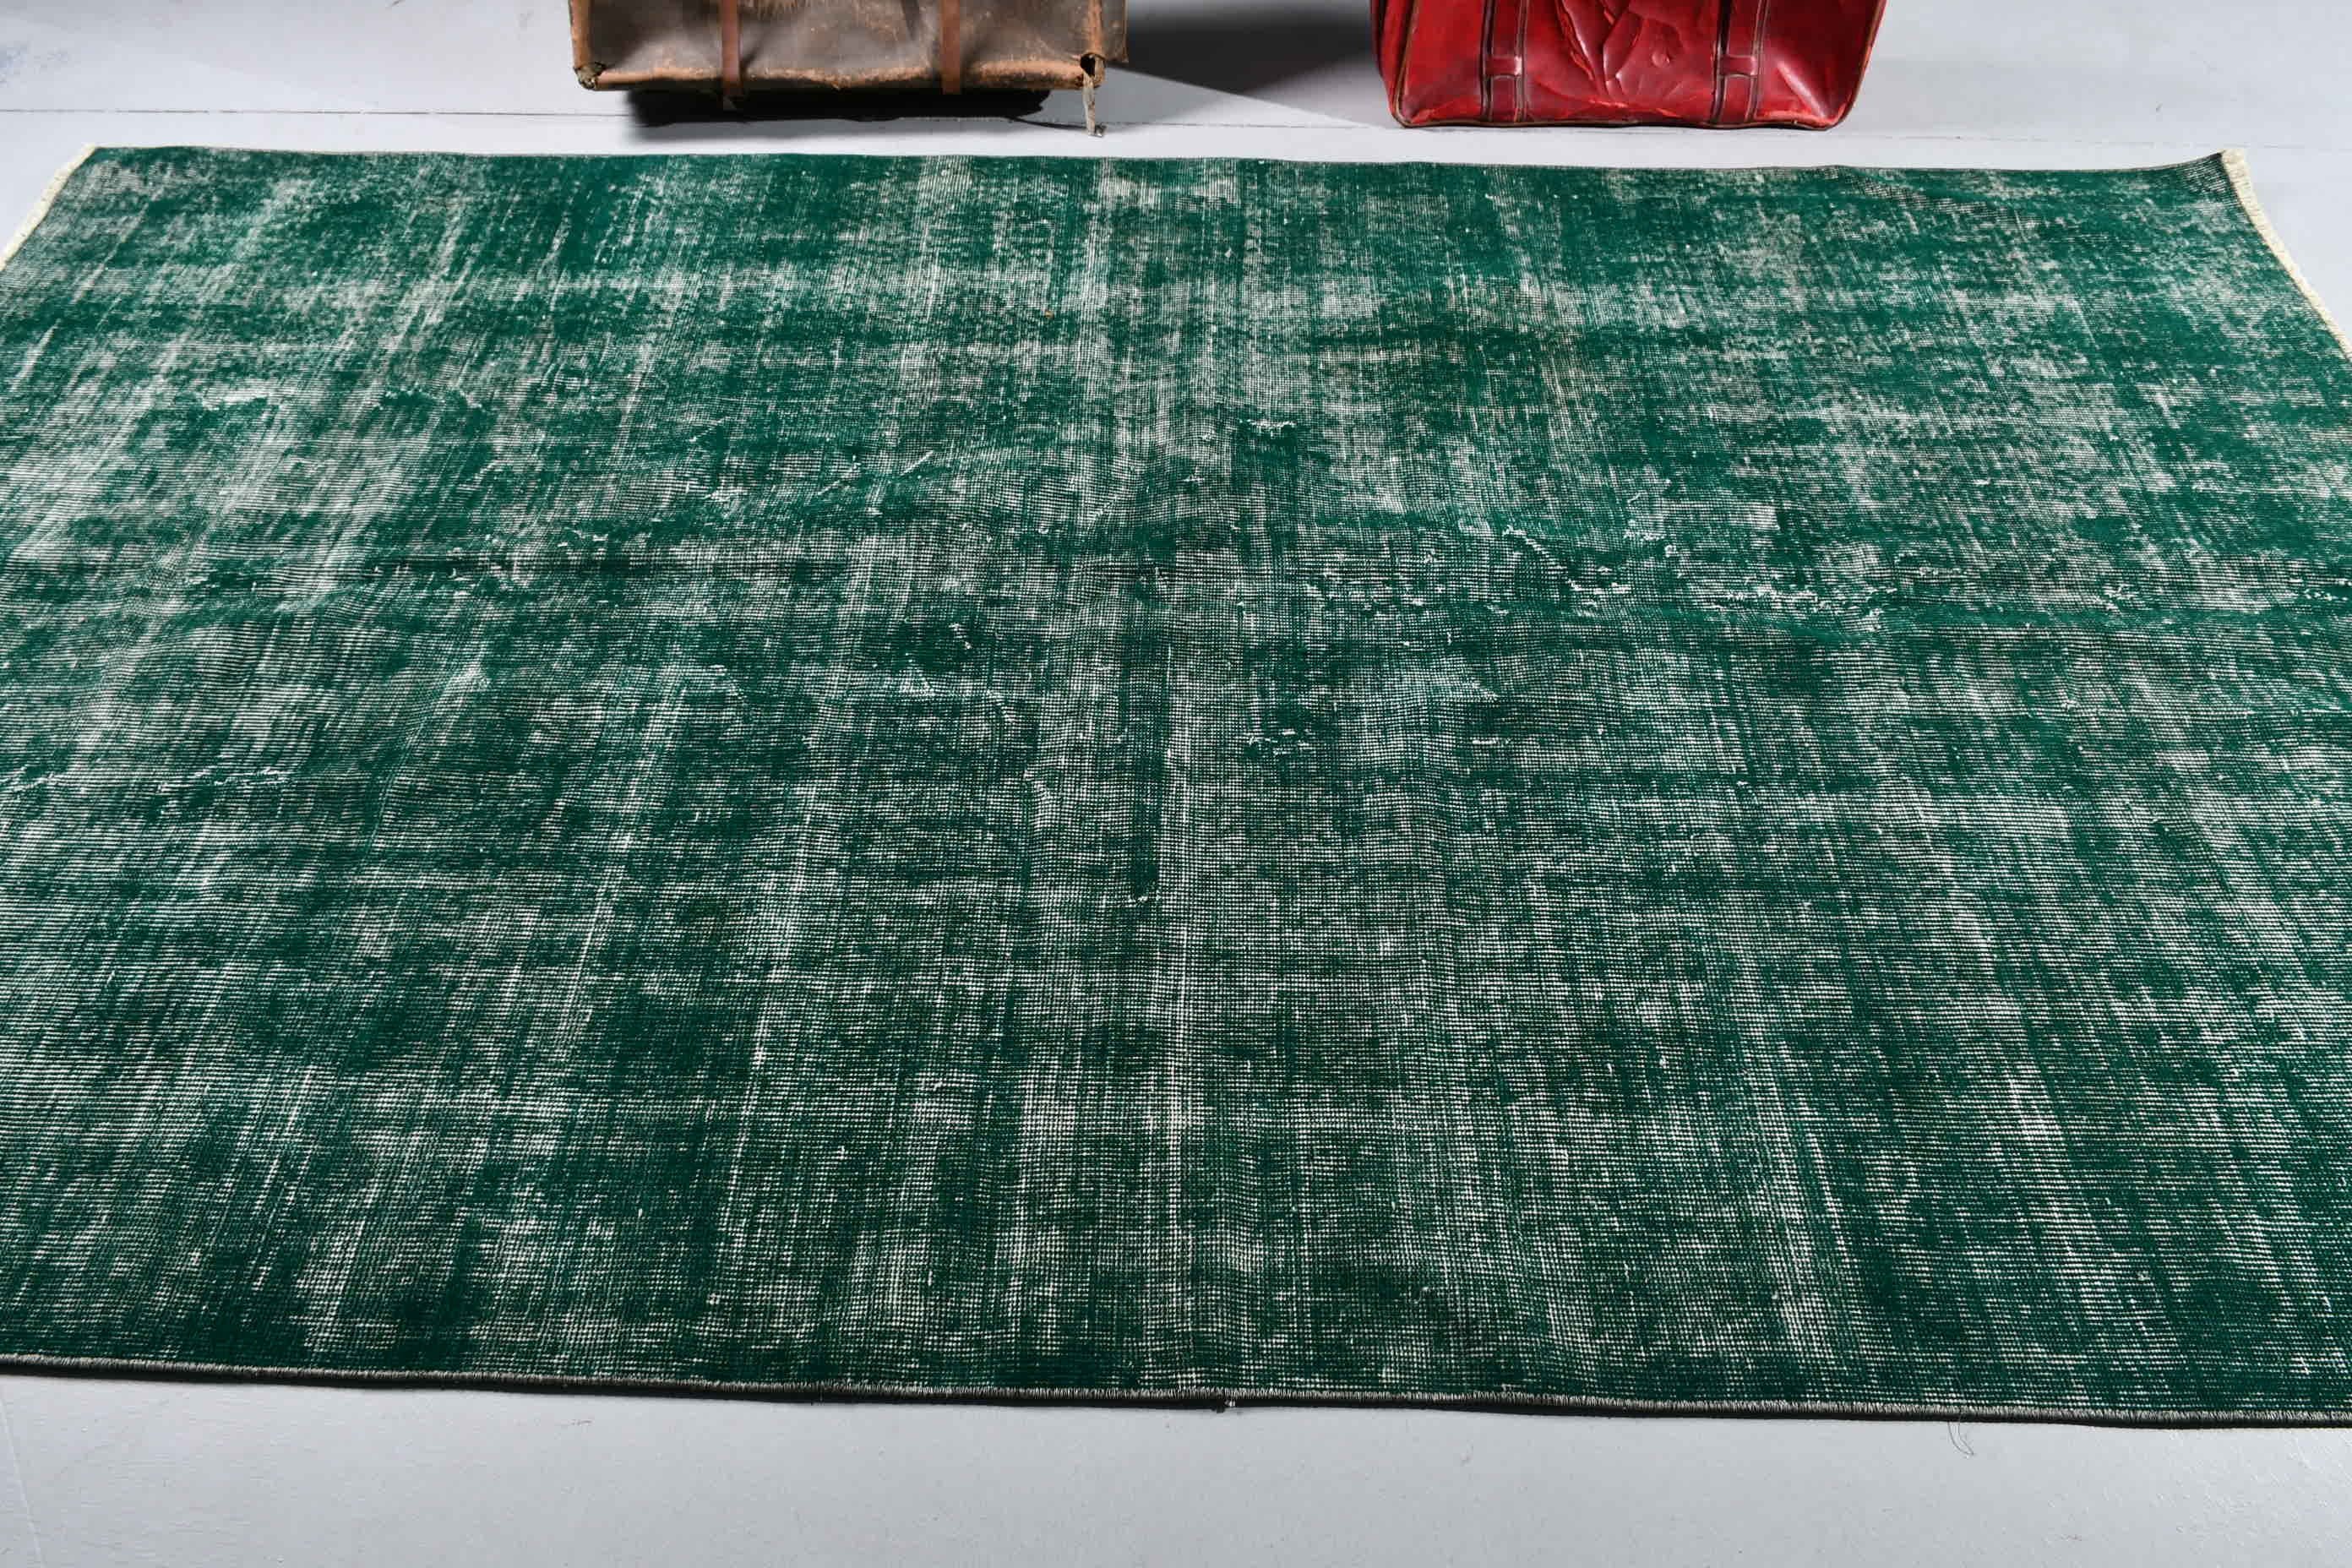 Bedroom Rug, Vintage Rug, Salon Rugs, Moroccan Rug, Old Rugs, Green Kitchen Rugs, Rugs for Dining Room, 5.6x9.4 ft Large Rugs, Turkish Rugs